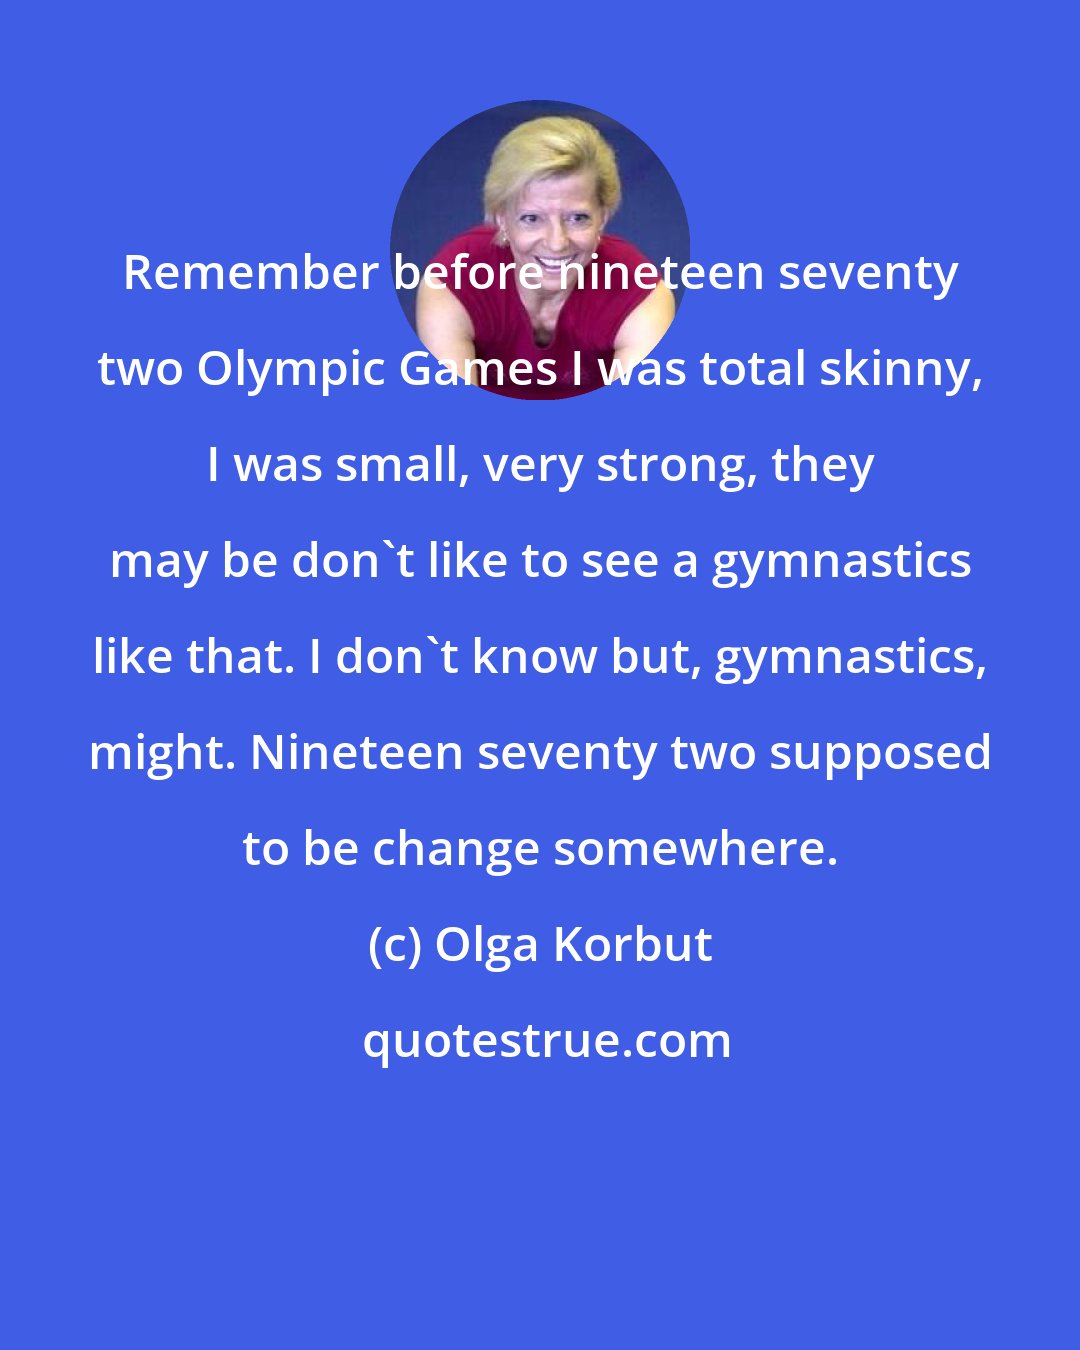 Olga Korbut: Remember before nineteen seventy two Olympic Games I was total skinny, I was small, very strong, they may be don't like to see a gymnastics like that. I don't know but, gymnastics, might. Nineteen seventy two supposed to be change somewhere.